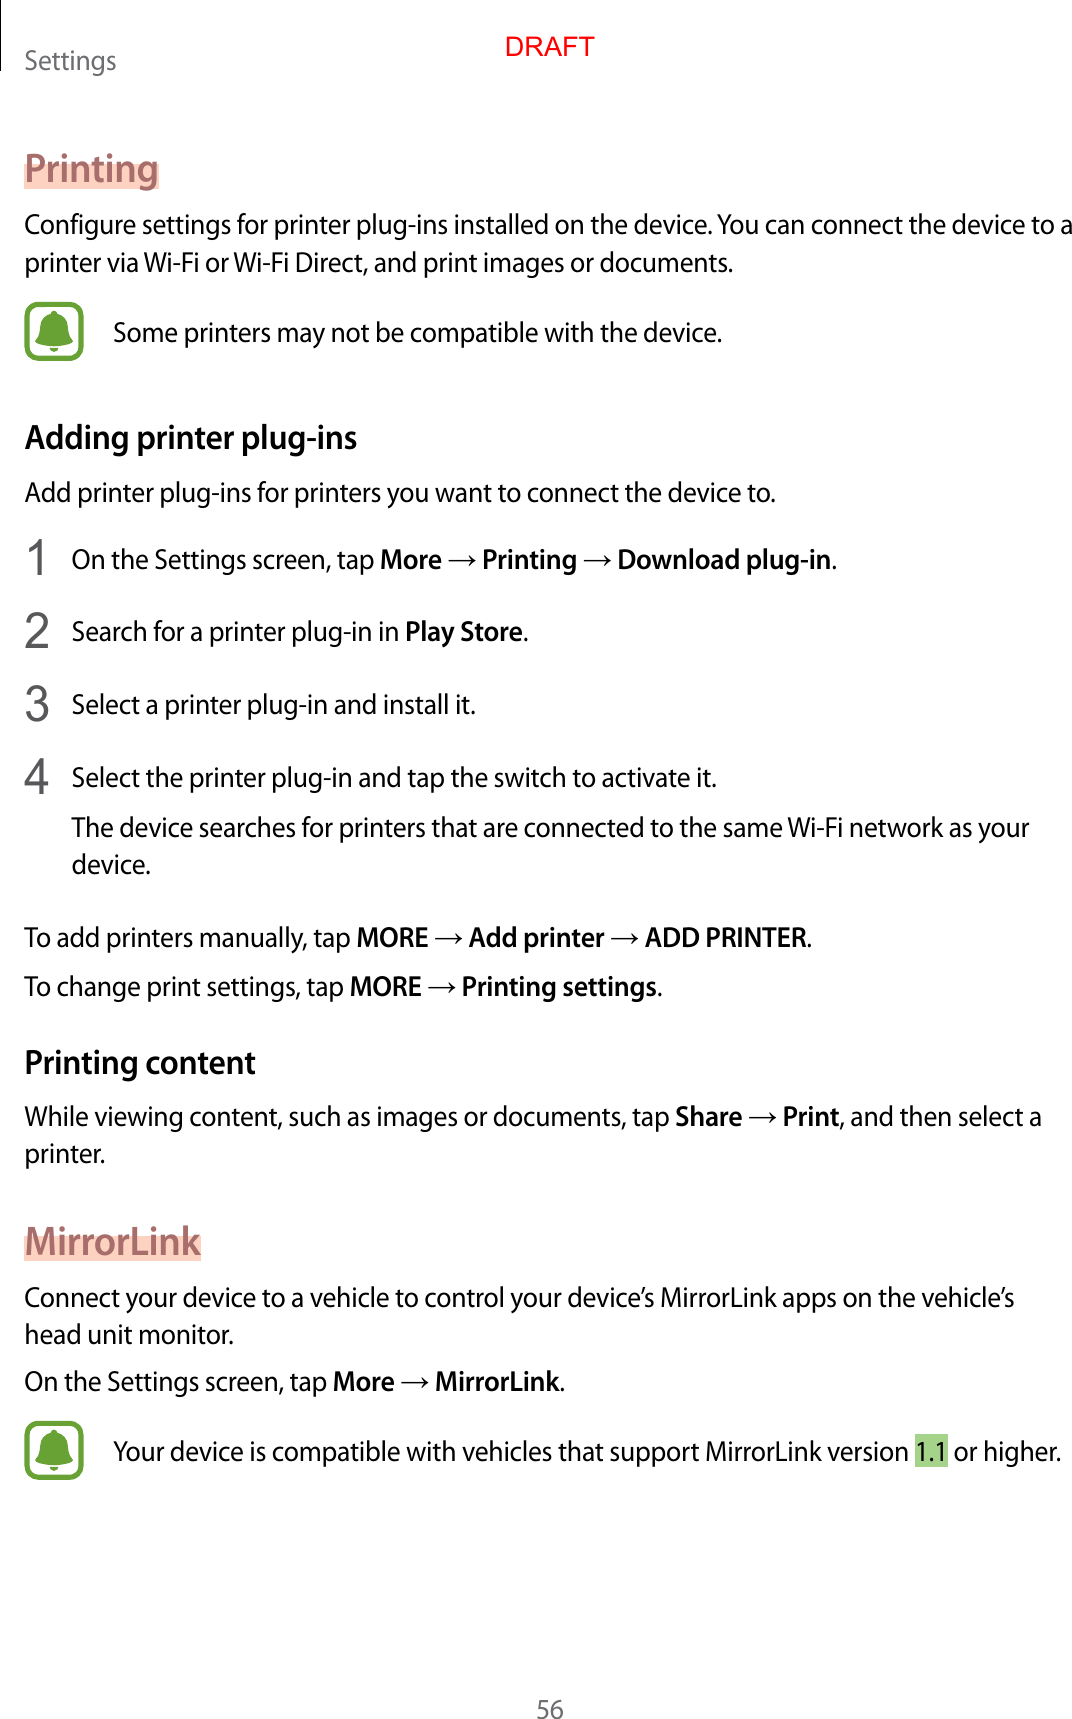 Settings56PrintingConfigur e settings f or print er plug-ins installed on the device. You can connect the device to a printer via Wi-Fi or  Wi-Fi Dir ect, and print images or documents .Some printers may not be compa tible with the device .Adding prin ter plug-insAdd print er plug-ins f or printers y ou w ant t o connect the device to.1  On the Settings screen, tap More → Printing → Download plug-in.2  Search for a print er plug-in in Play St or e.3  Select a printer plug-in and install it.4  Select the printer plug-in and tap the switch t o activate it.The device sear ches f or print ers that ar e c onnected to the same Wi-Fi network as y our device.To add printers manually, tap MORE → Add prin ter → ADD PRINTER.To change print settings, tap MORE → Printing settings.Prin ting c ont entWhile viewing cont ent , such as images or documents , tap Share → Print, and then select a printer.MirrorLinkConnect your device t o a v ehicle to c ontr ol y our devic e’s MirrorLink apps on the vehicle’s head unit monitor.On the Settings screen, tap More → MirrorLink.Your device is compatible with vehicles that support MirrorLink v ersion 1.1 or higher.DRAFT